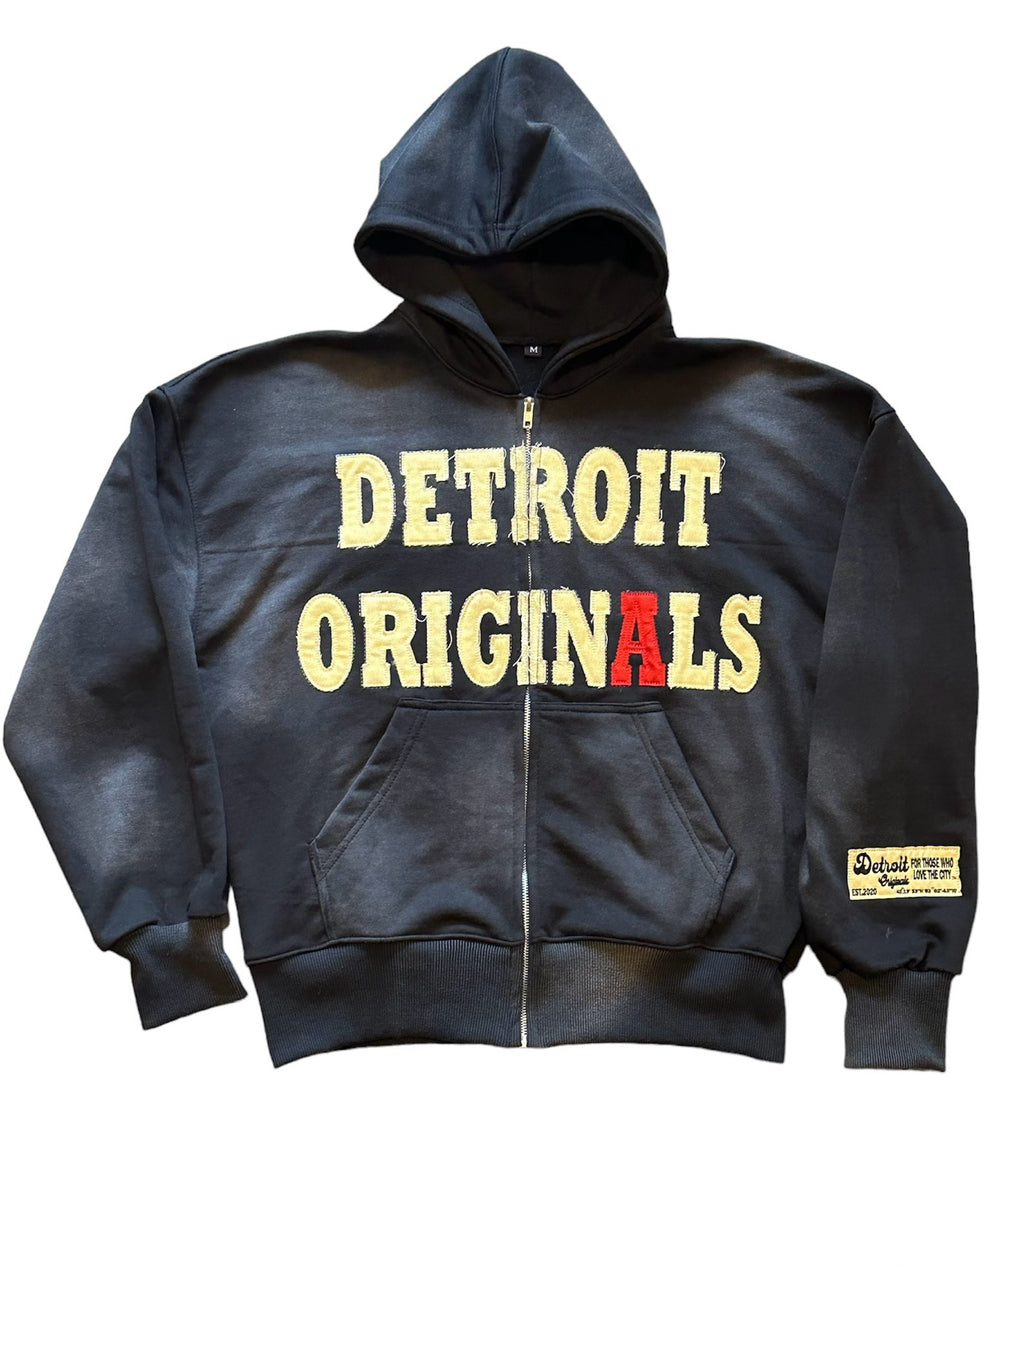 Detroit Originals “For Those Who Love The City” Hoodie